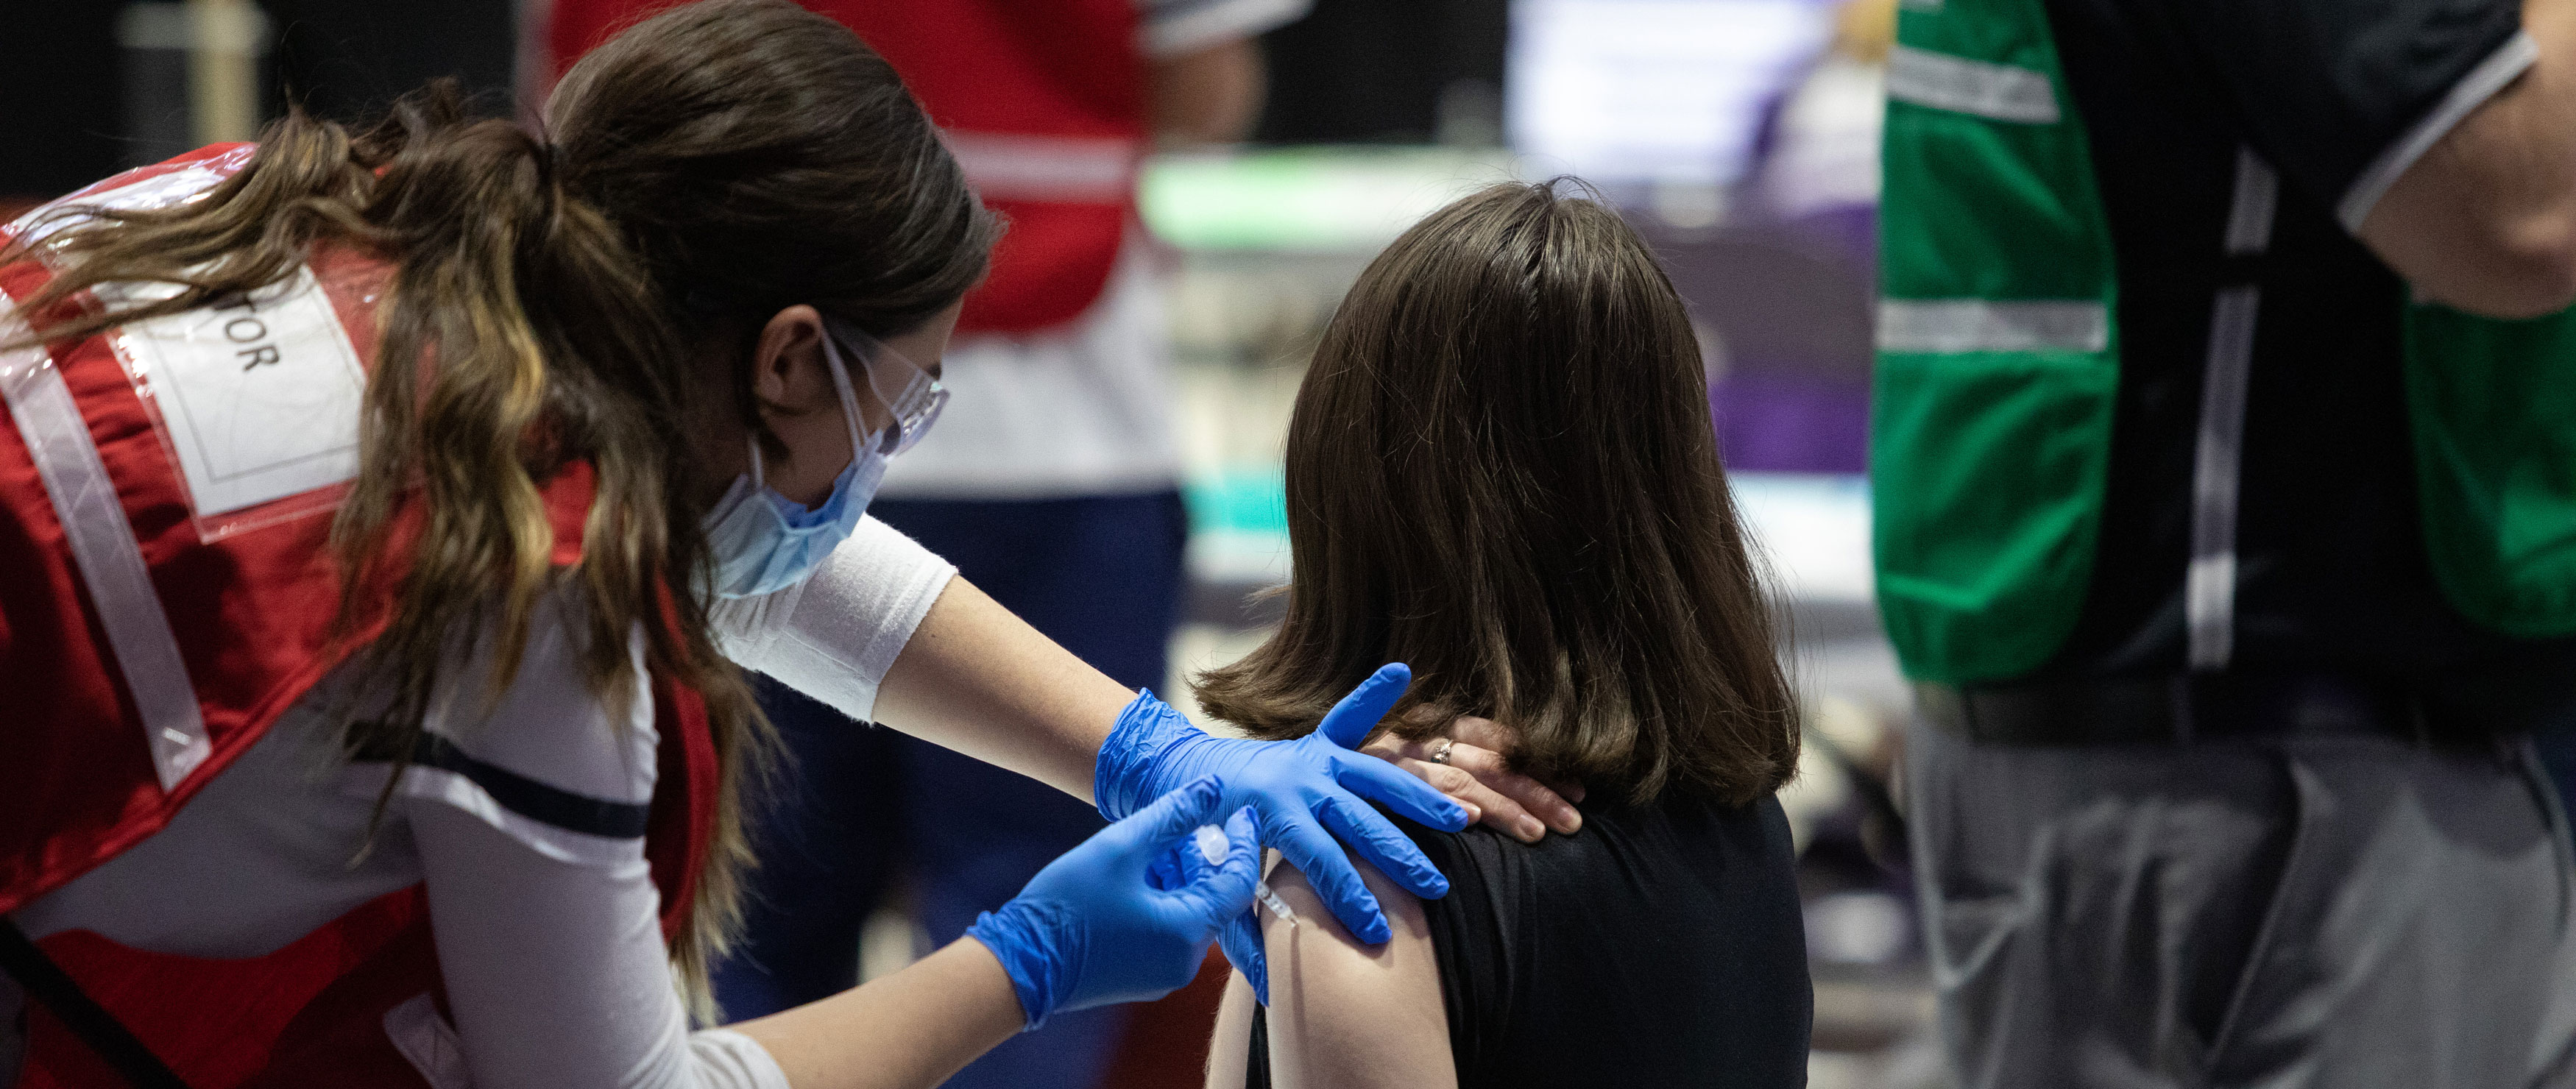 A student looks away while a medical professional injects their arm with a vaccine.